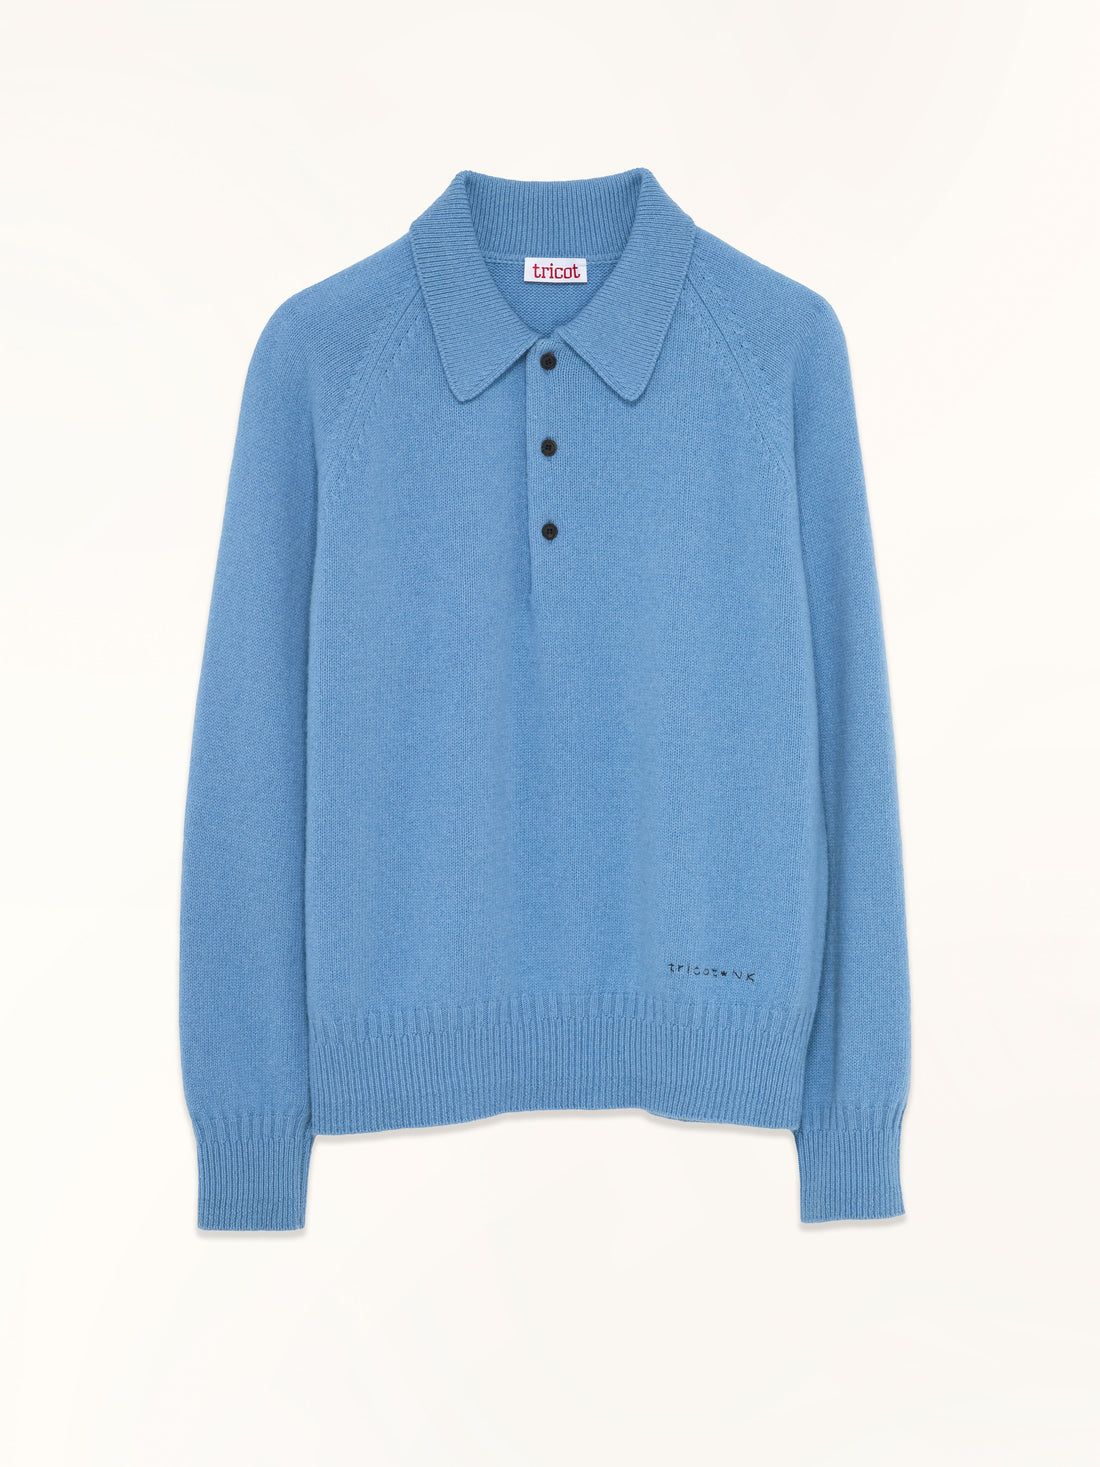 Women's cashmere polo in Nina's blue